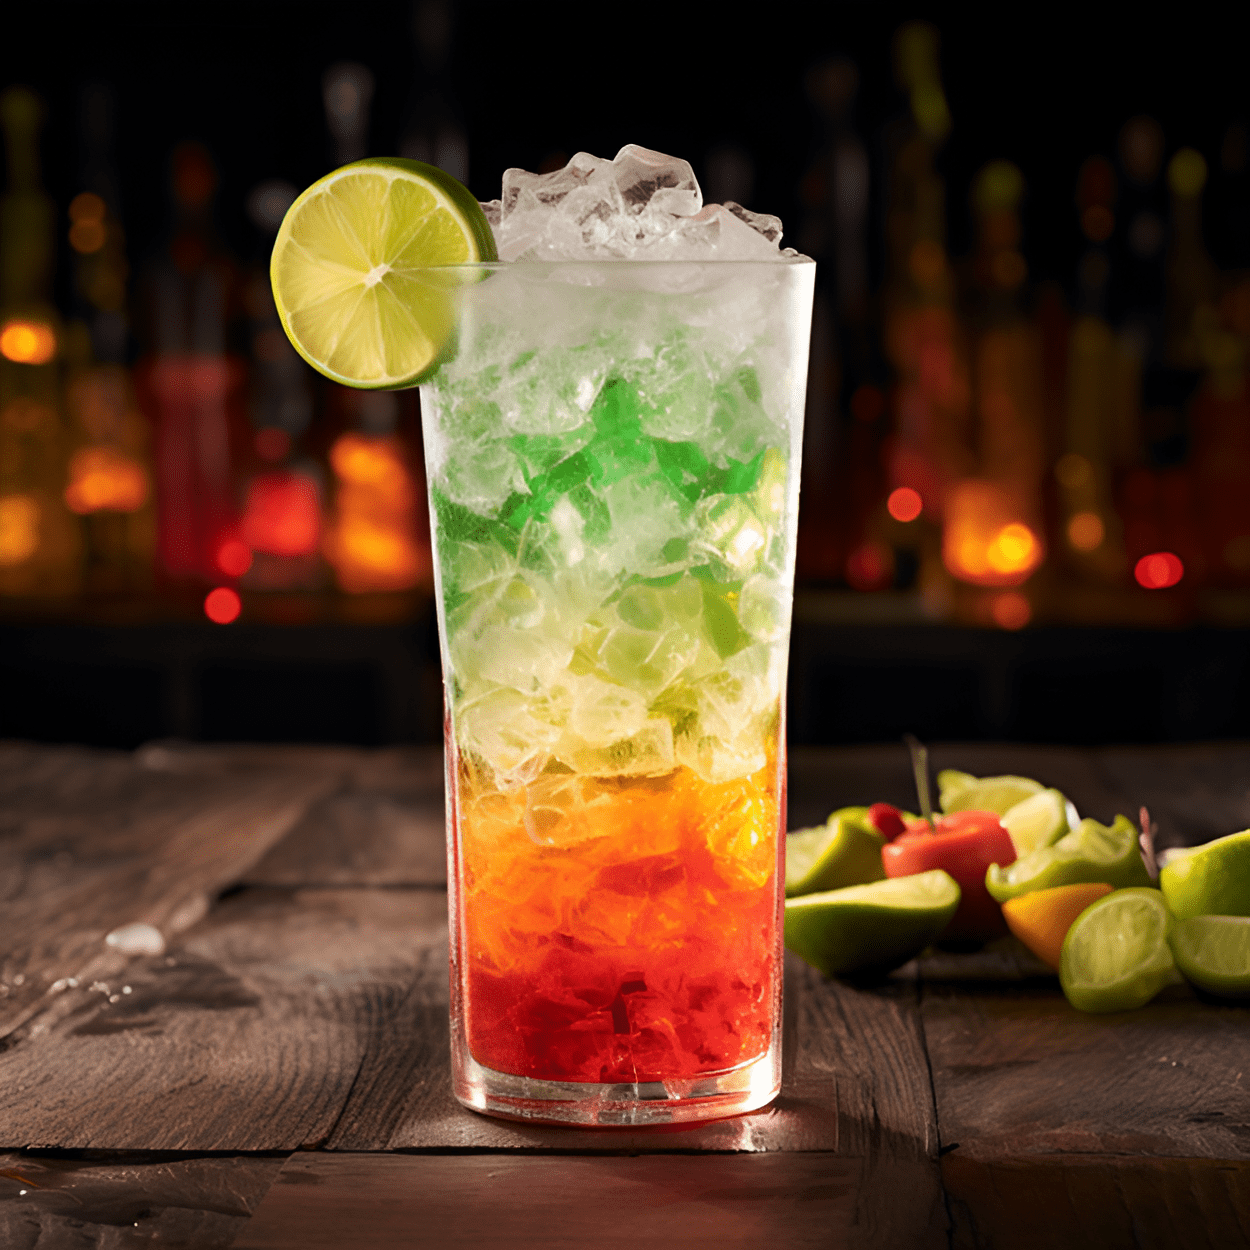 Tropical Vodka Red Bull Cocktail Recipe - This cocktail is a delightful blend of sweet, tangy, and refreshing. The tropical flavors of pineapple and orange are balanced by the tartness of the lime, while the vodka provides a smooth, strong base. The Red Bull gives it a unique, energizing kick.